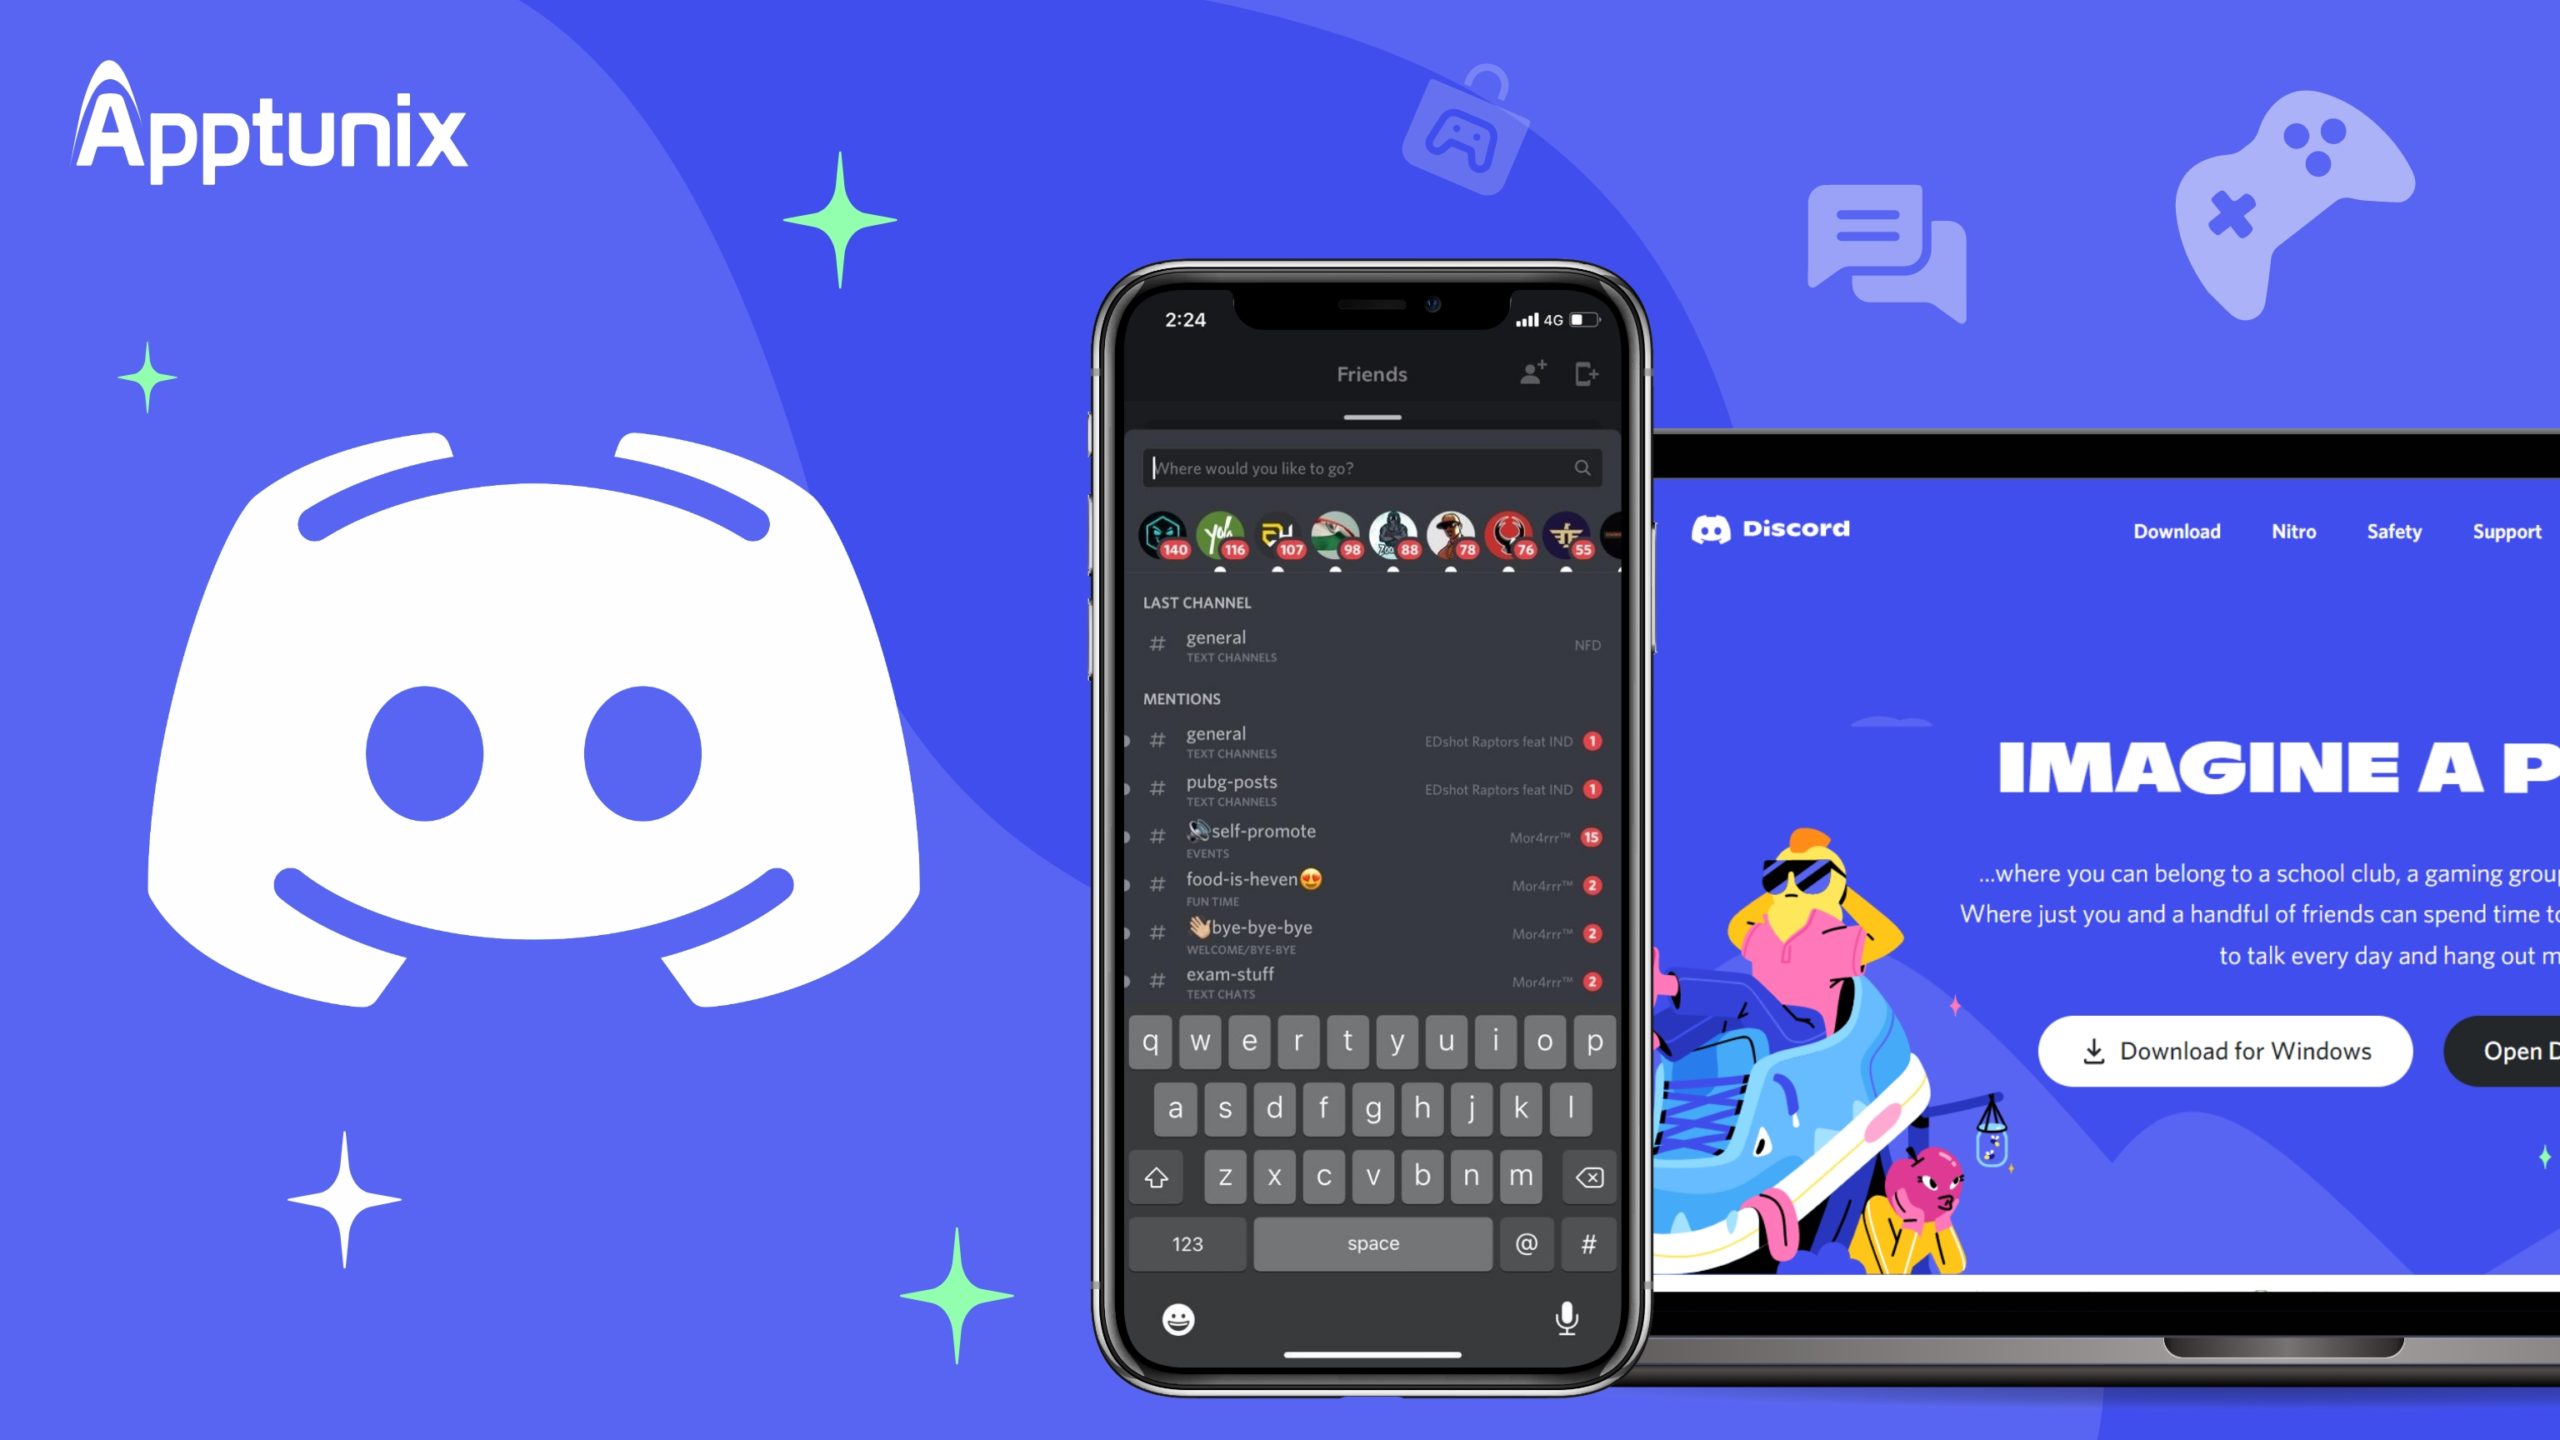 Among Us adds Twitch and Discord mobile integrations in latest